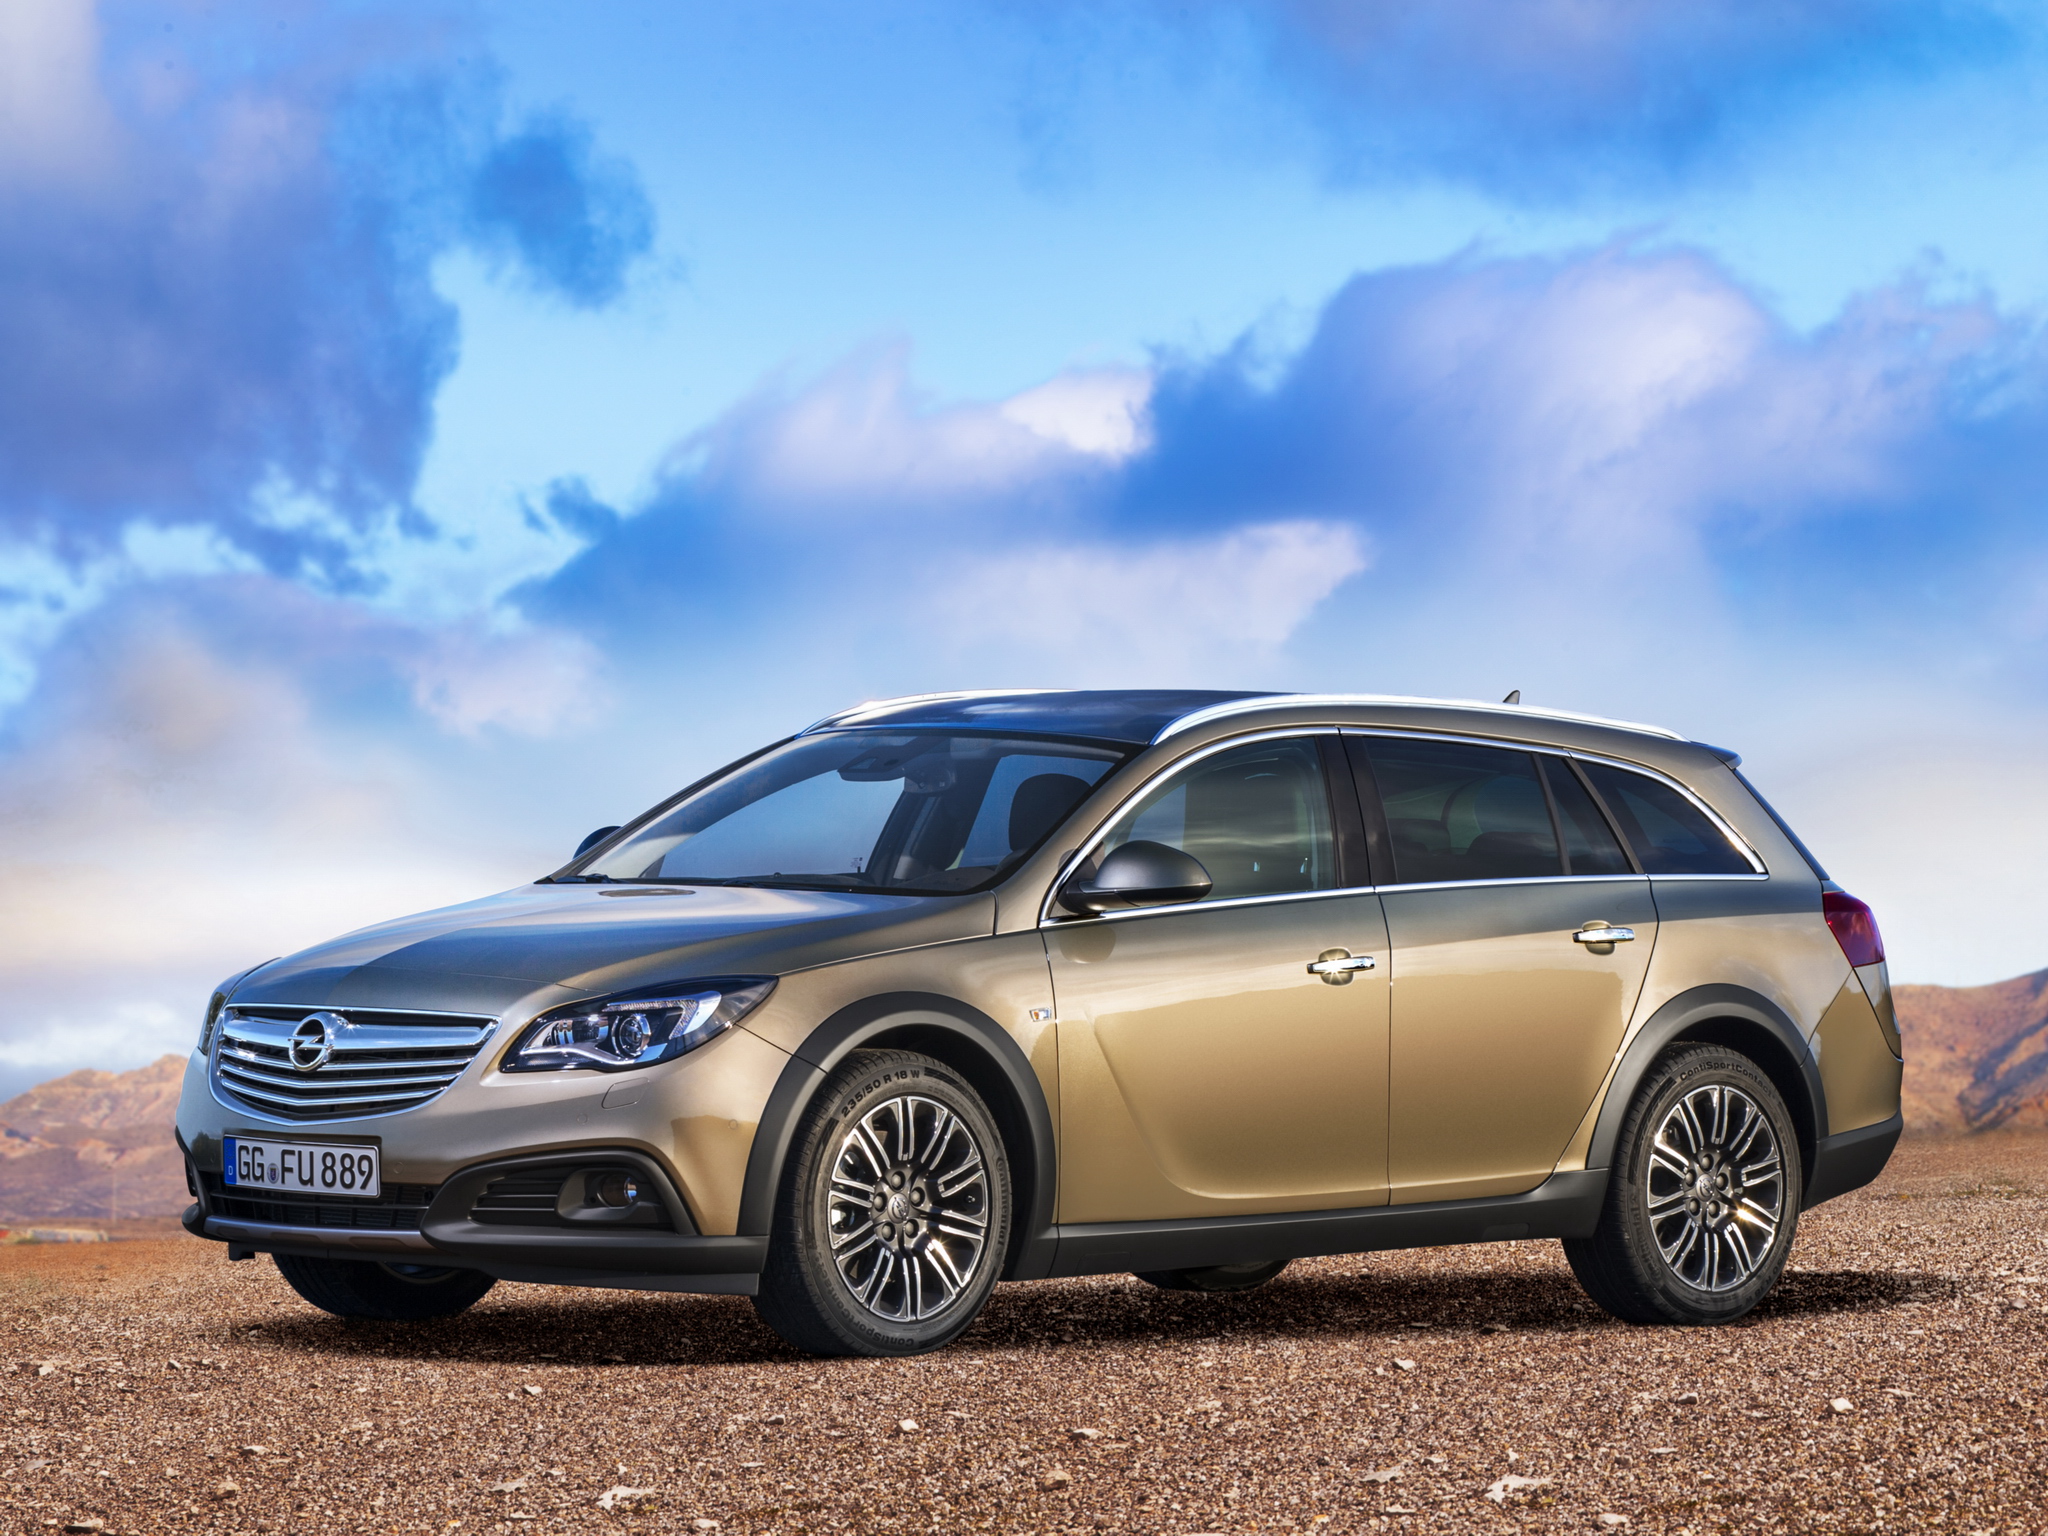 2014, Opel, Insignia, Country, Tourer, Stationwagon, Gs Wallpaper